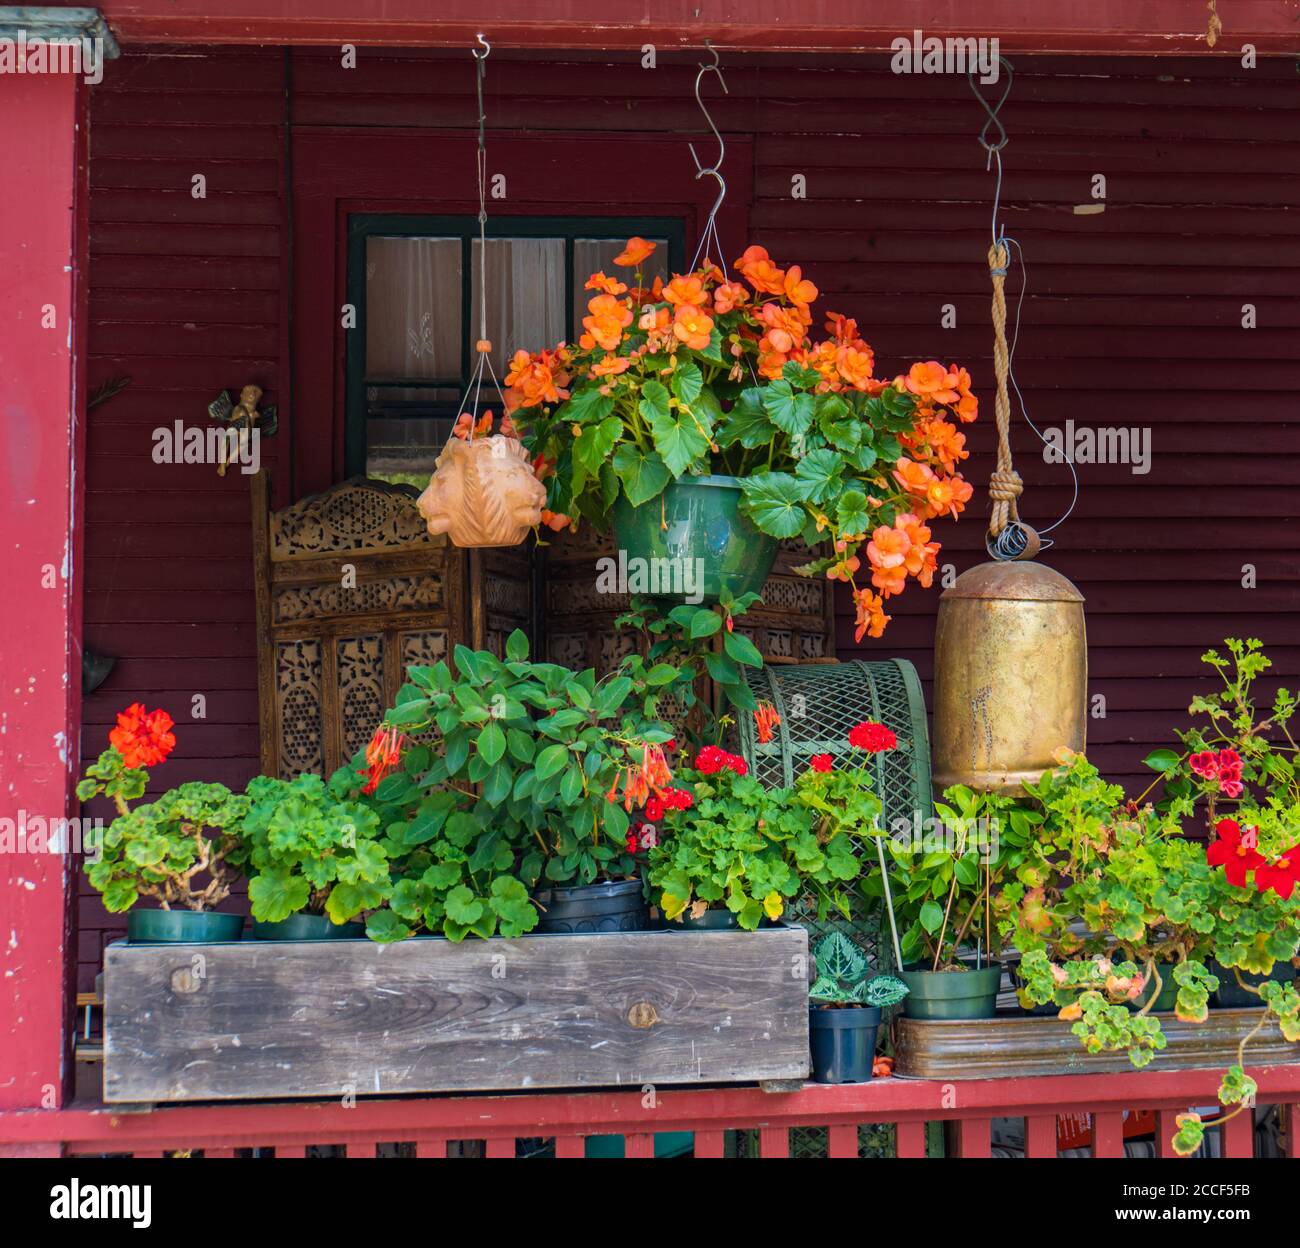 orange and red flowers highlight a porch with decorations Stock Photo